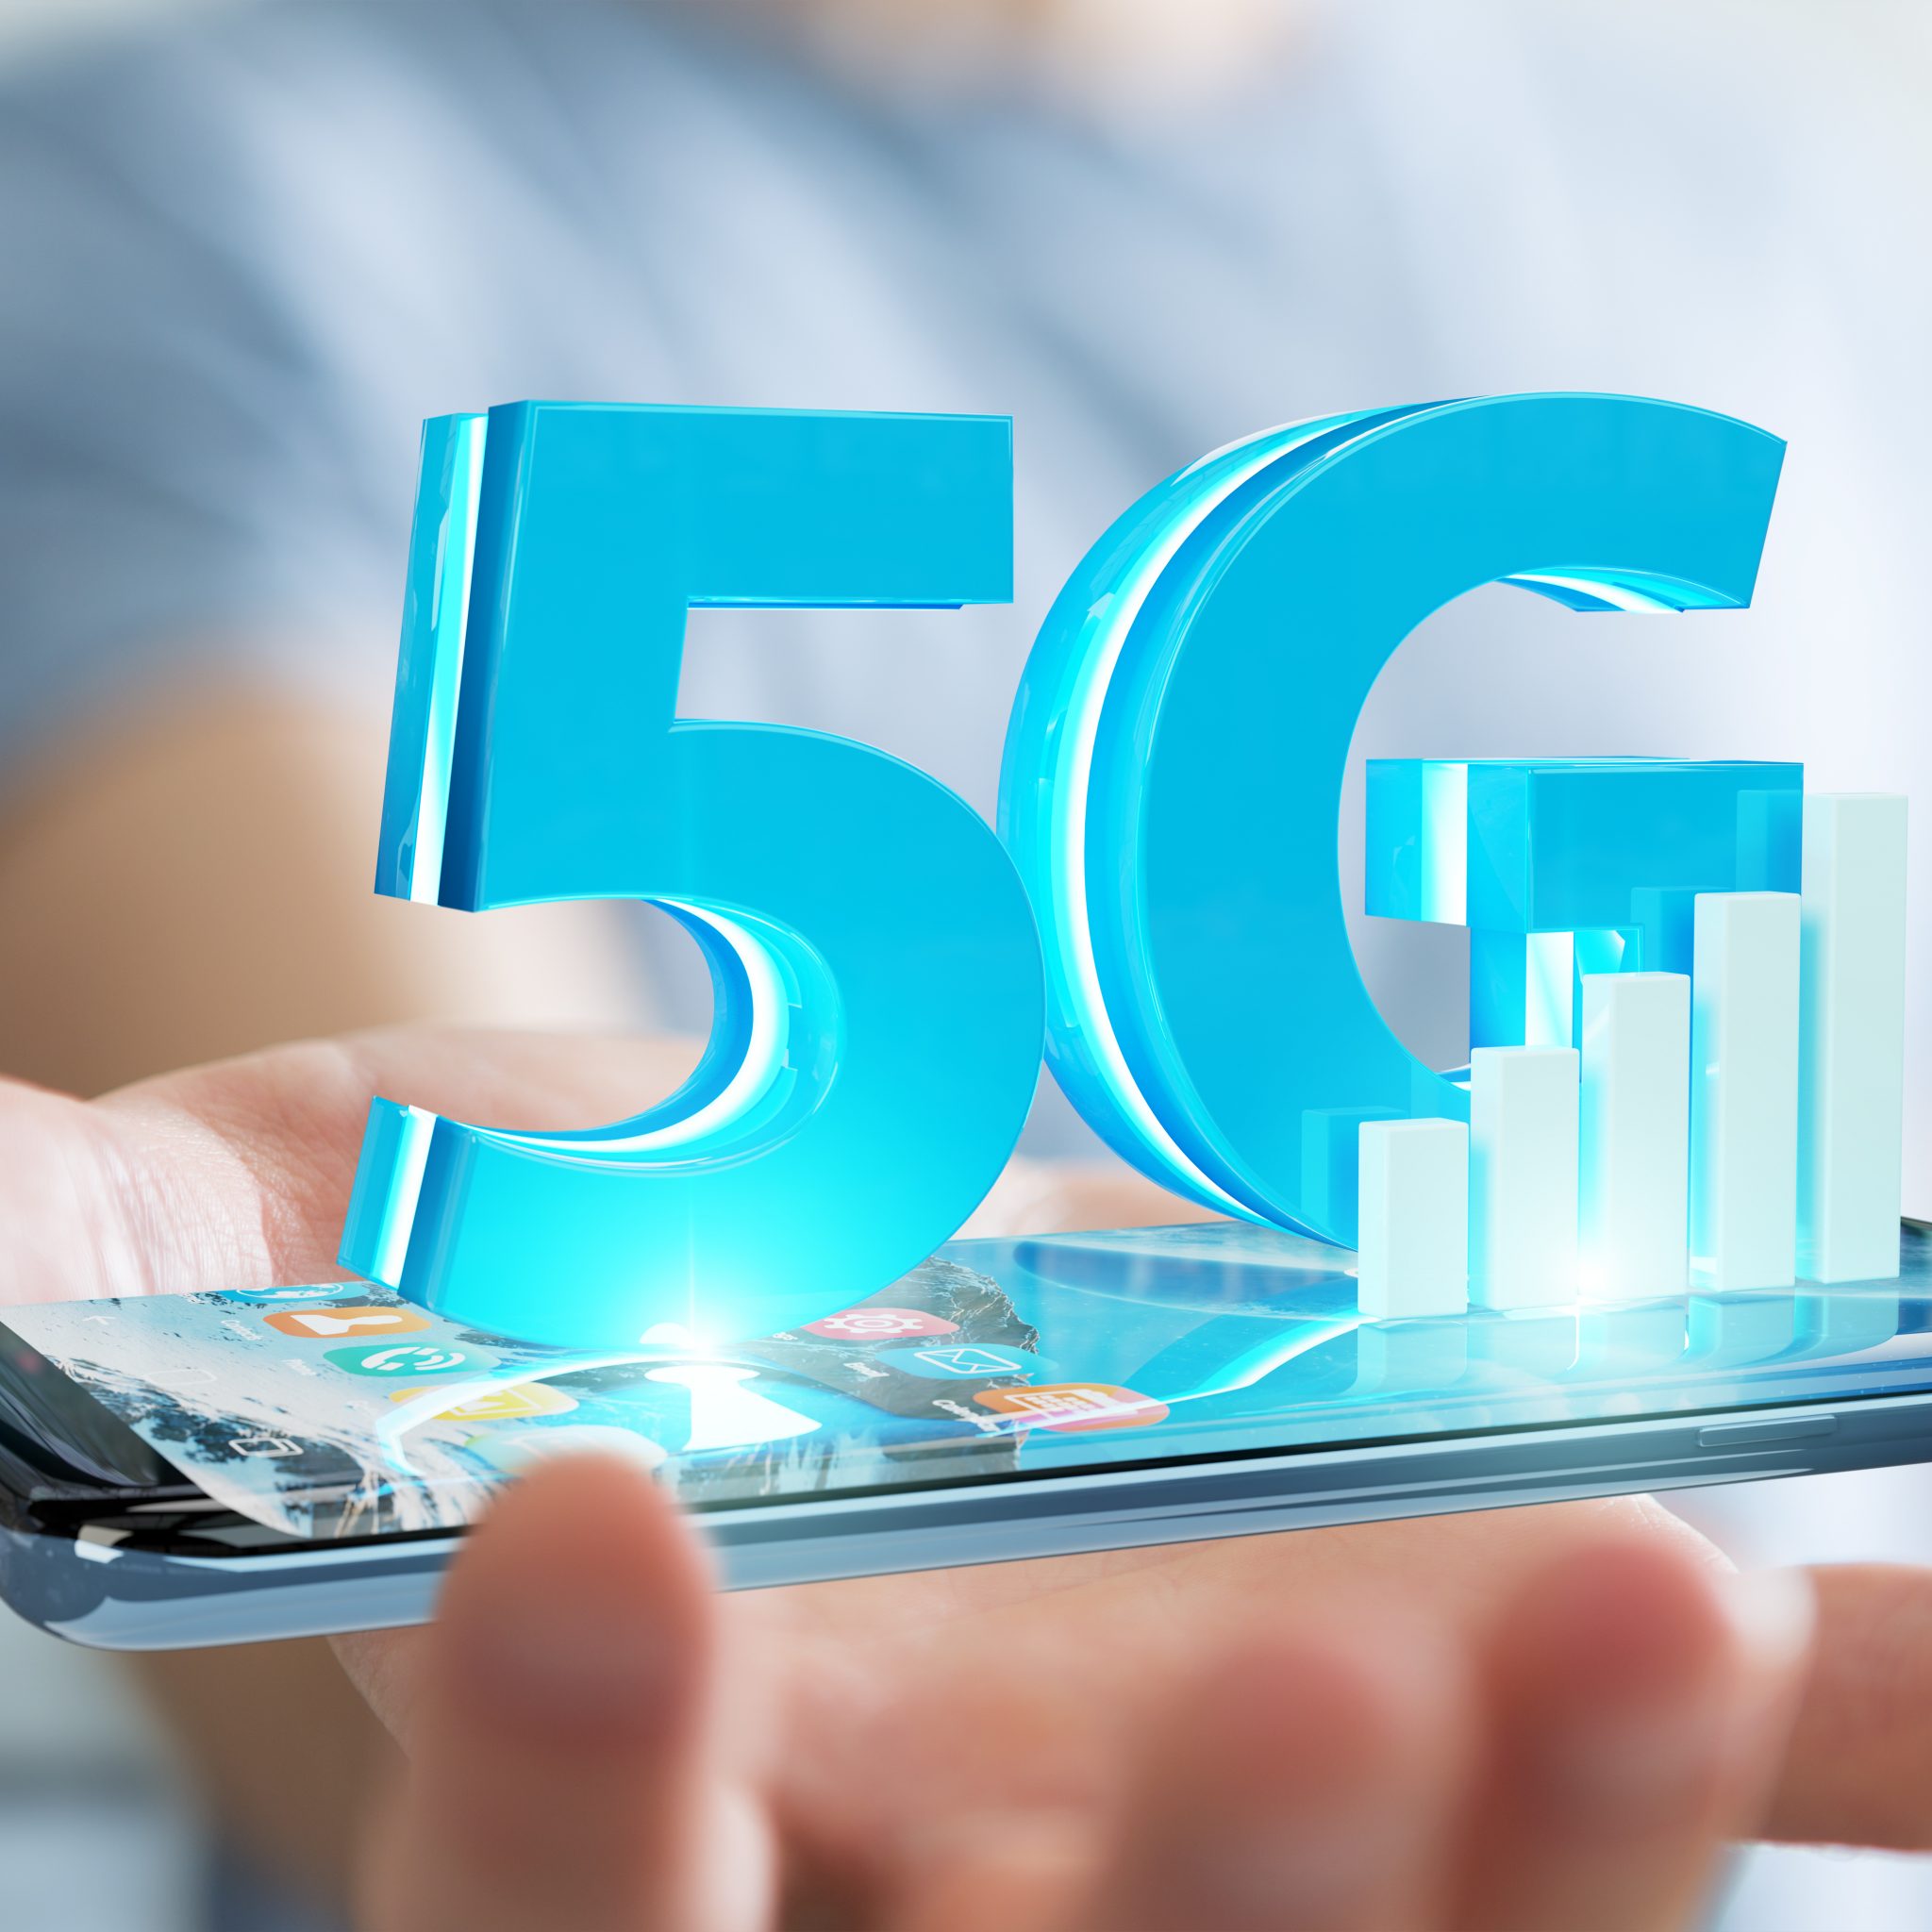 Qualcomm and Ericsson launch 5G for the first time in India